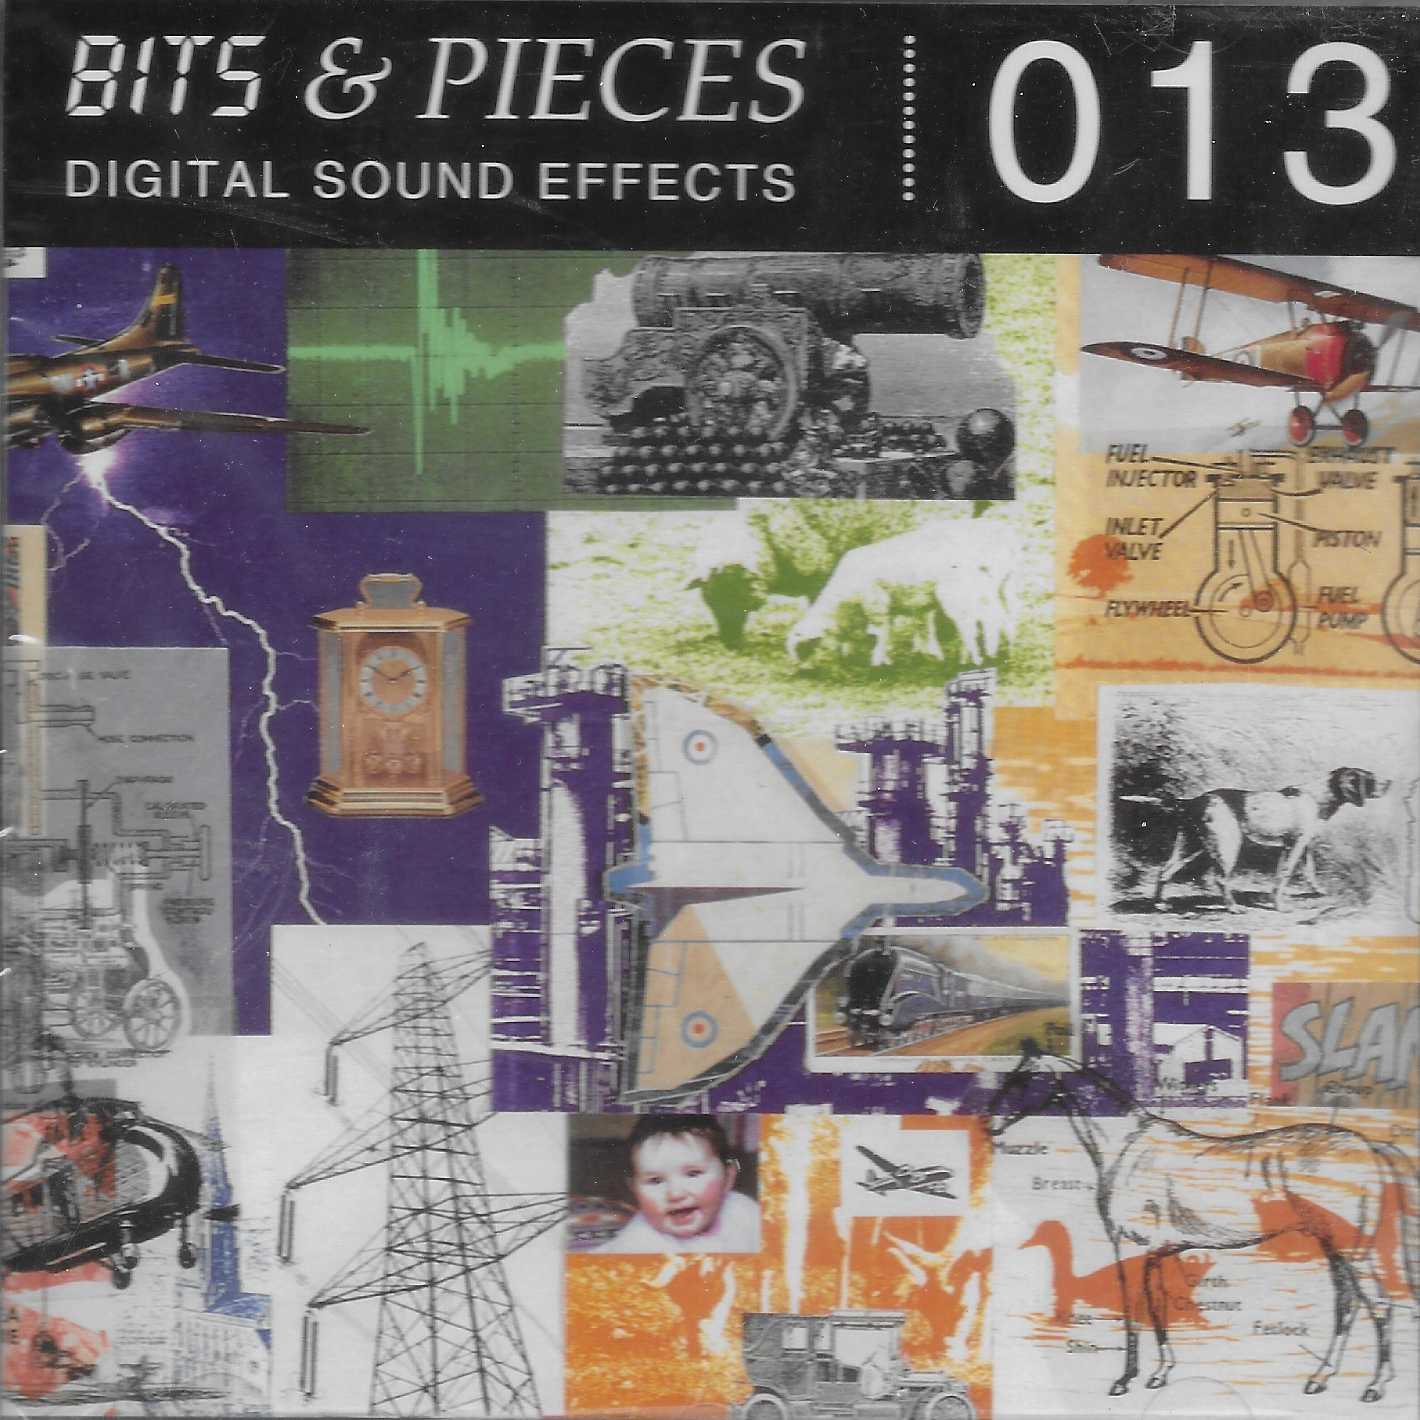 Picture of Bits & pieces digital sound effects 013 by artist Various from ITV, Channel 4 and Channel 5 cds library